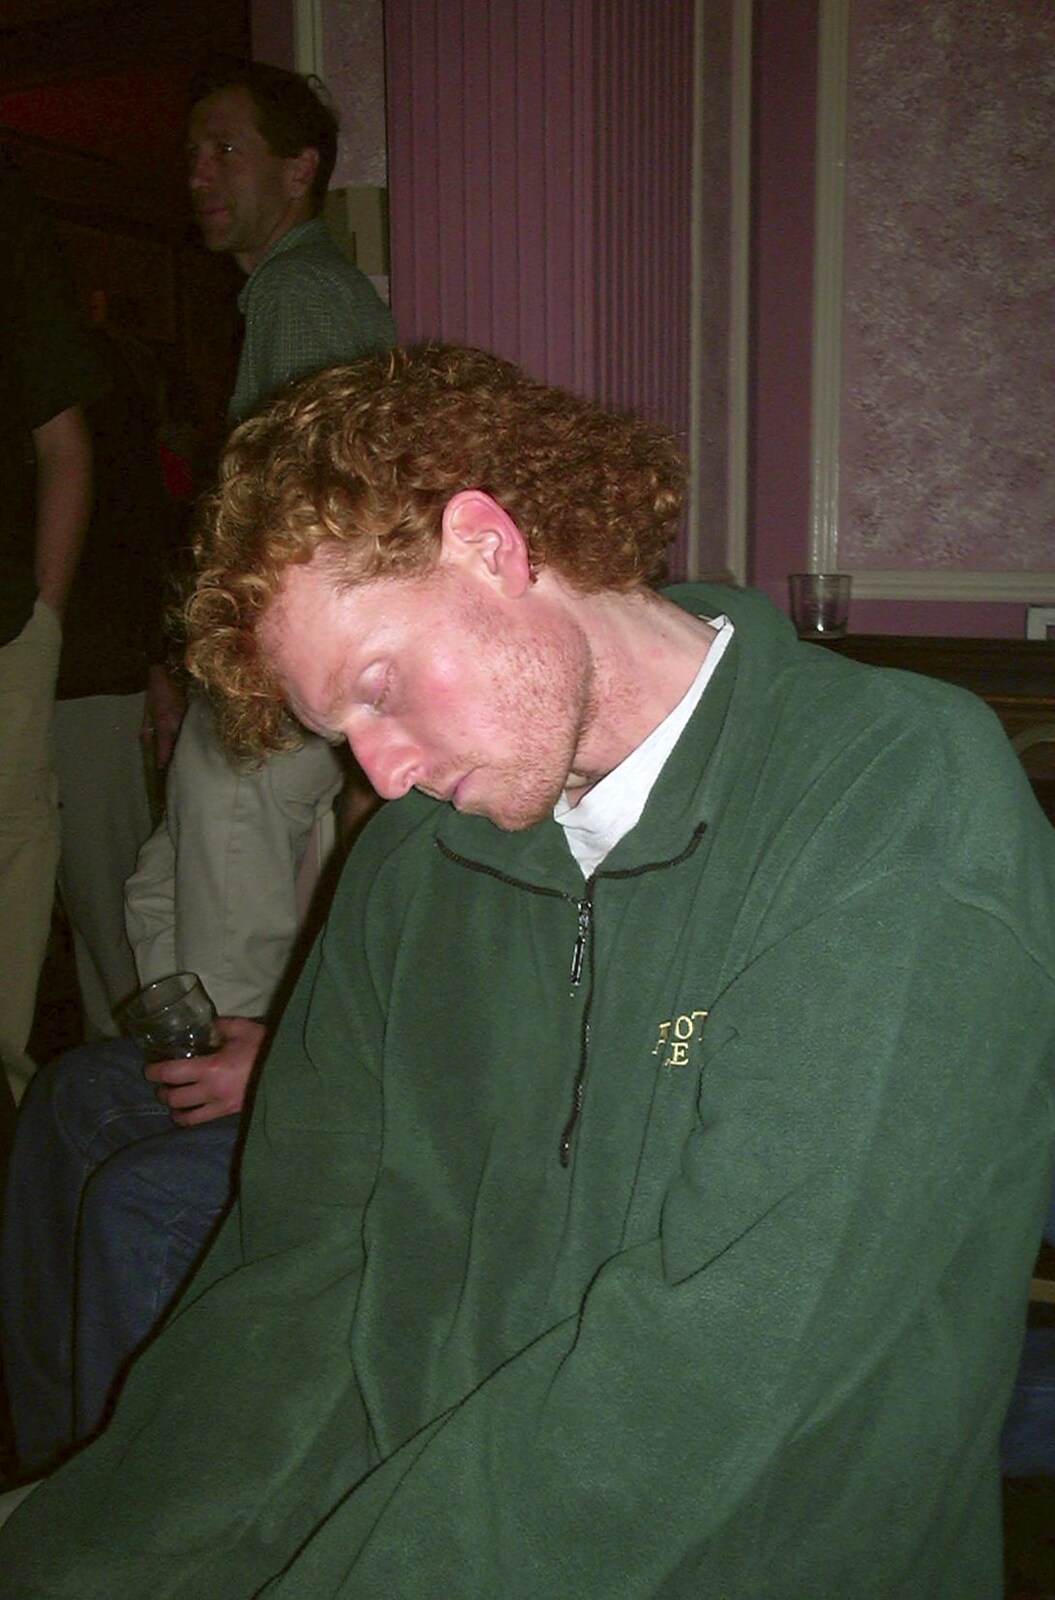 Wavy's asleep again from BSCC and The Cottage's Opening Night, Thorpe St. Andrew, Norwich - 15th November 2002